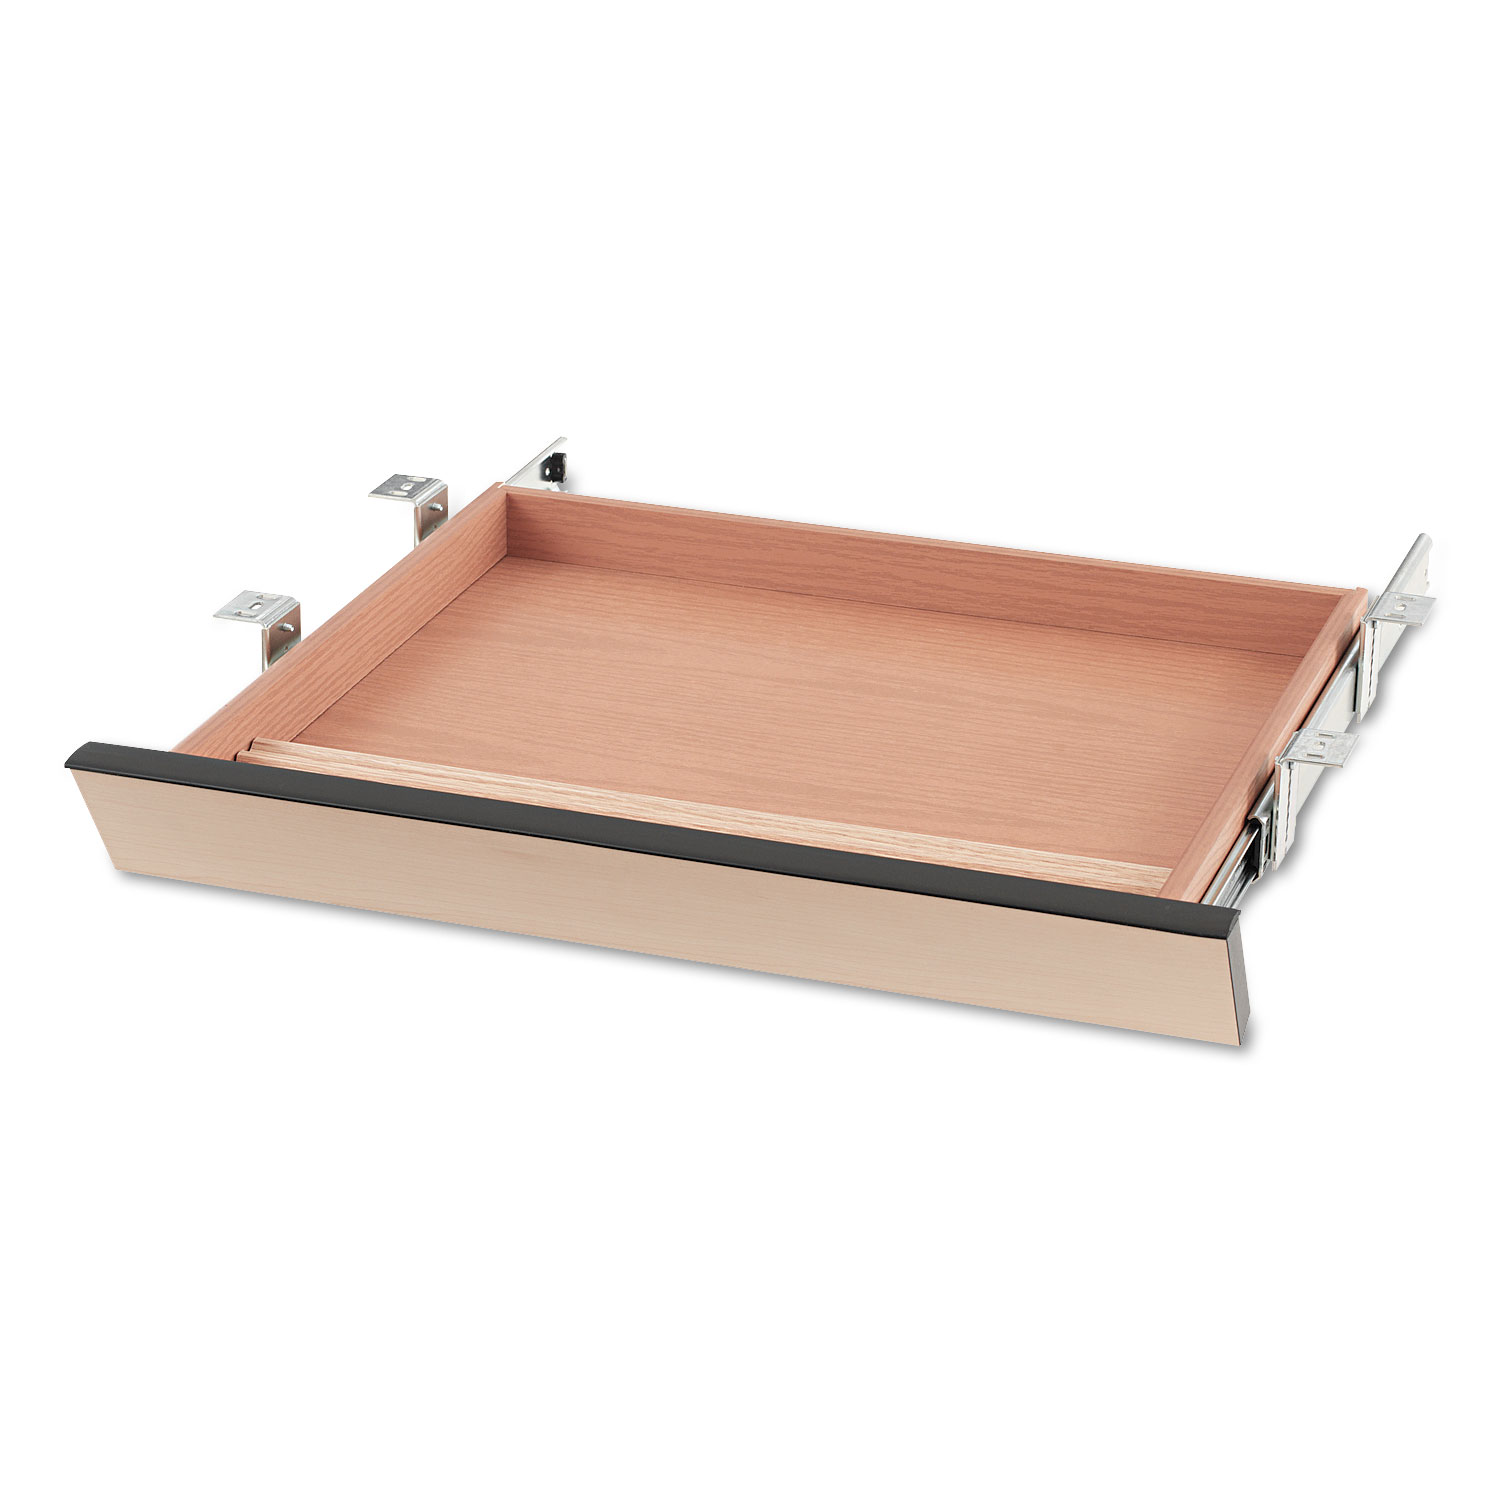 Laminate Angled Center Drawer, 22w x 15 3/8d x 2 1/2h, Natural Maple